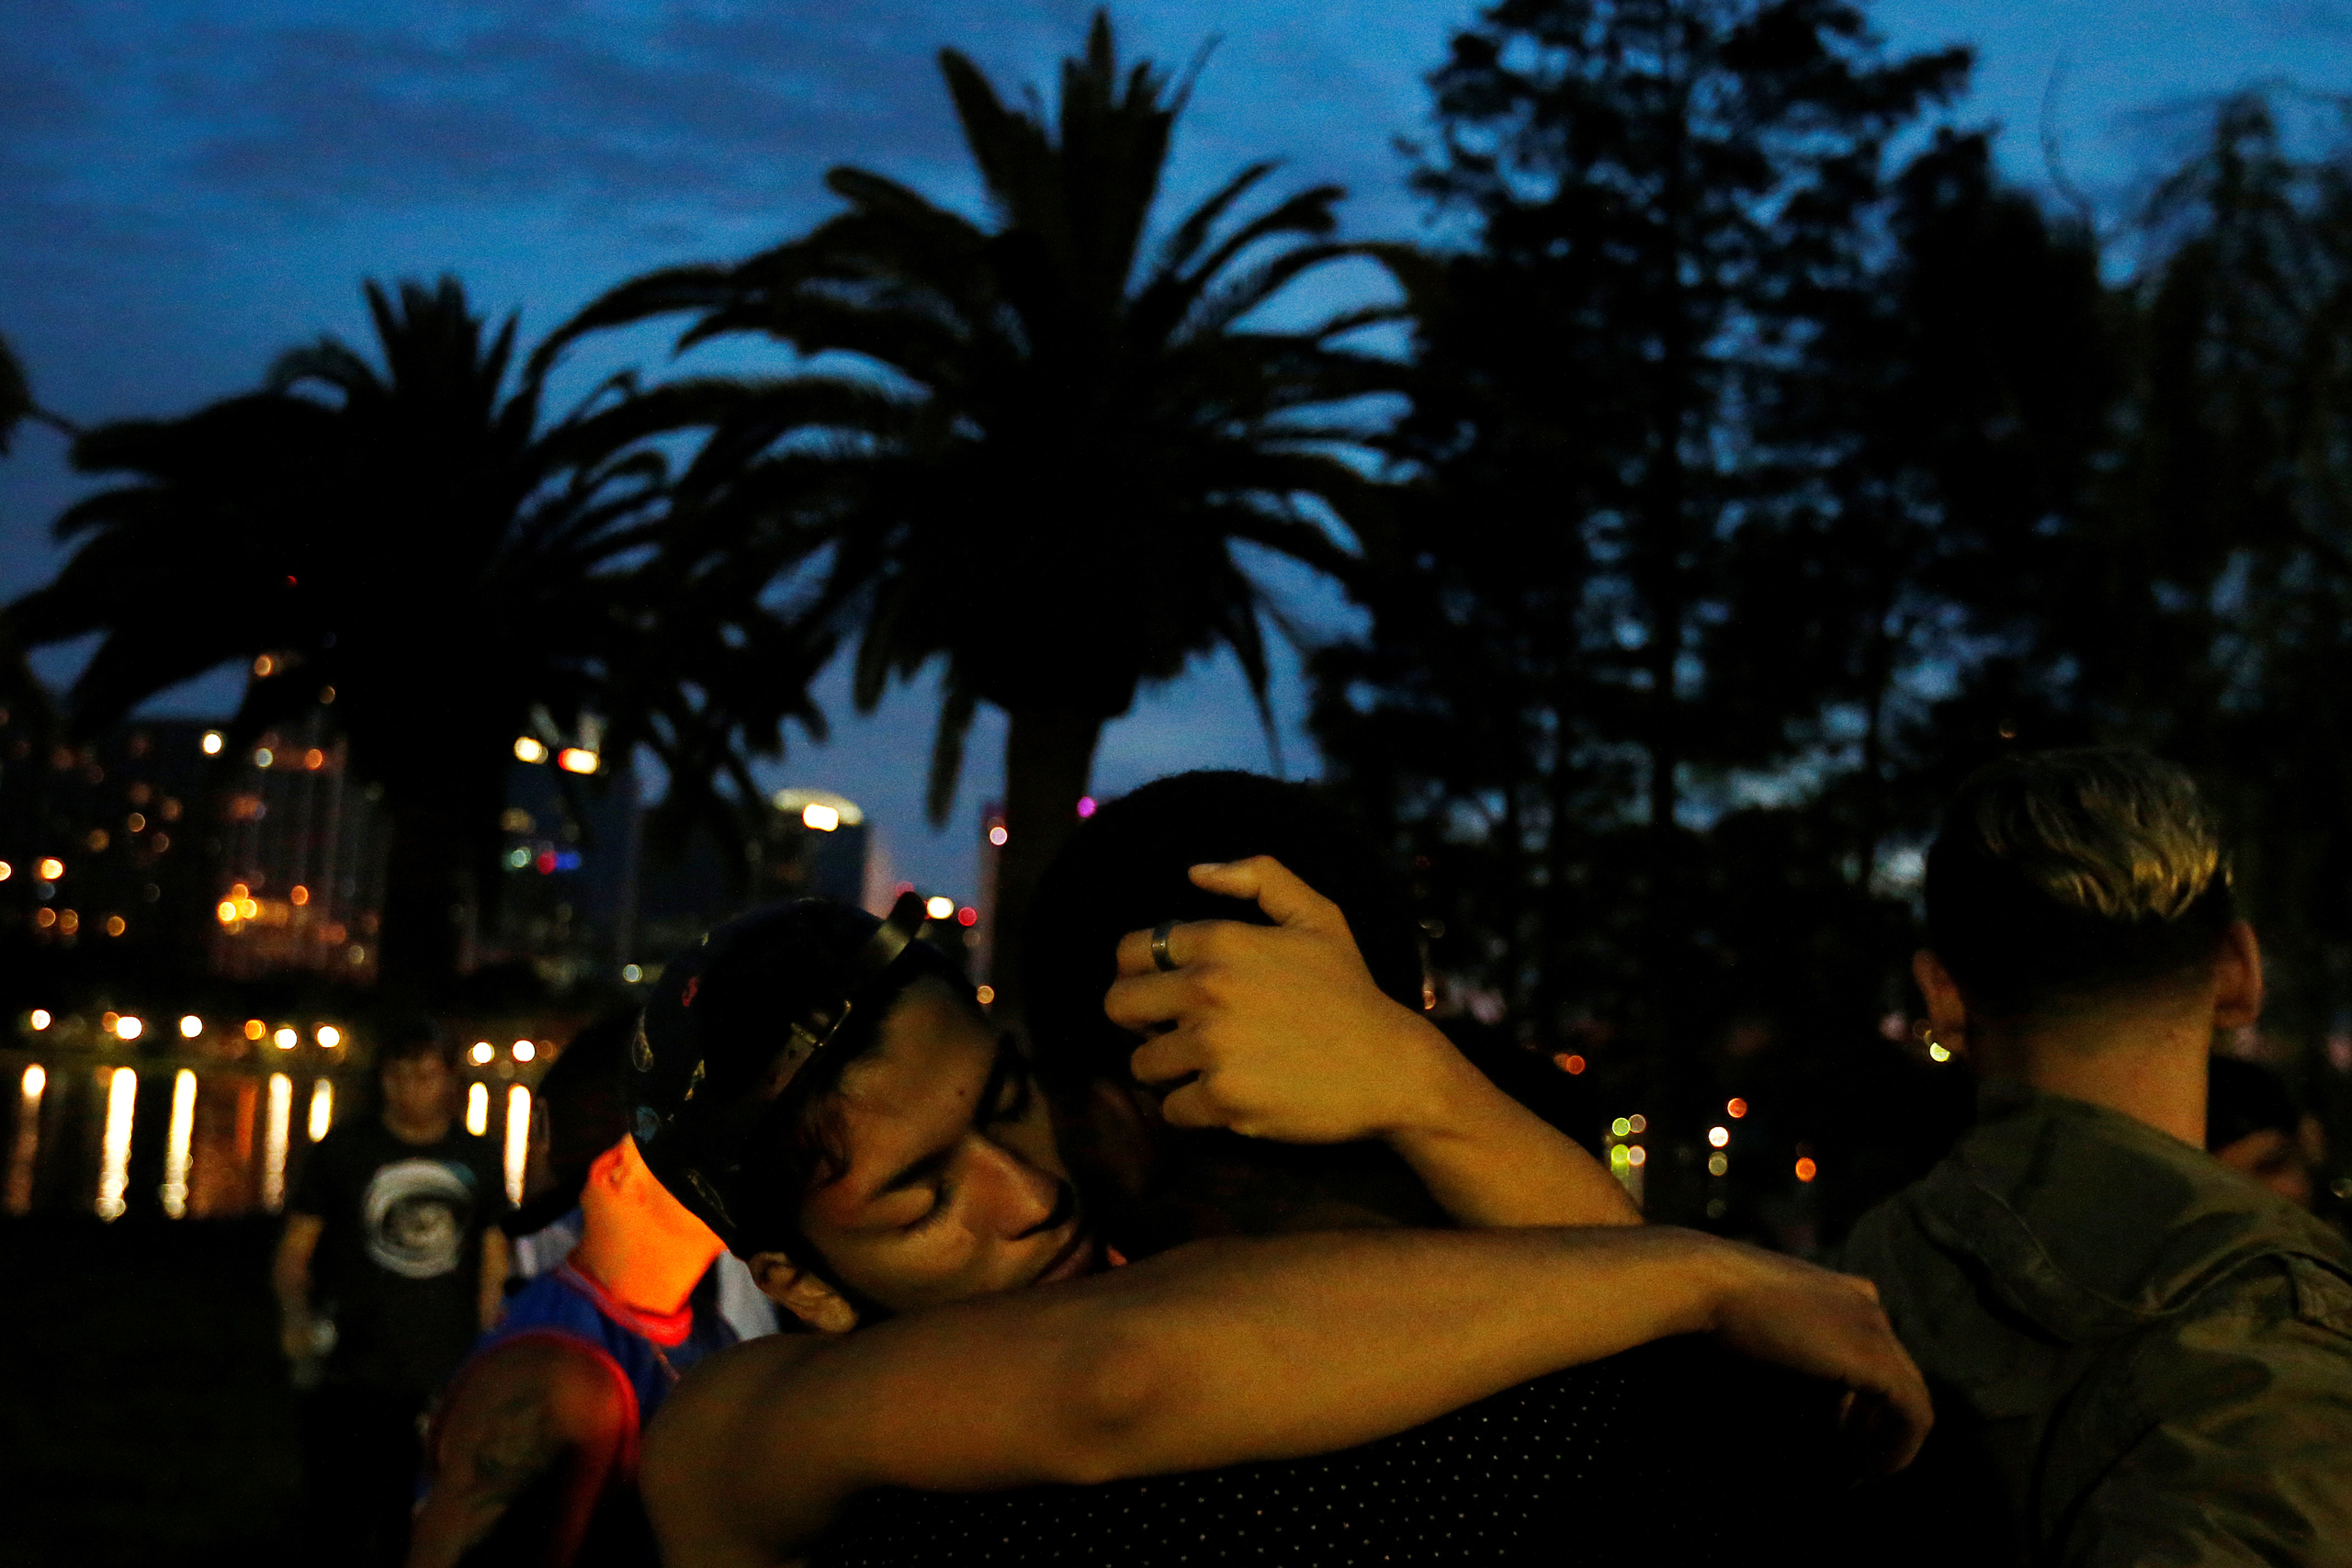 Men hug during a vigil in a park following a mass shooting at the Pulse gay nightclub in Orlando Fla., on June 12, 2016. (Carlo Allegri—Reuters)